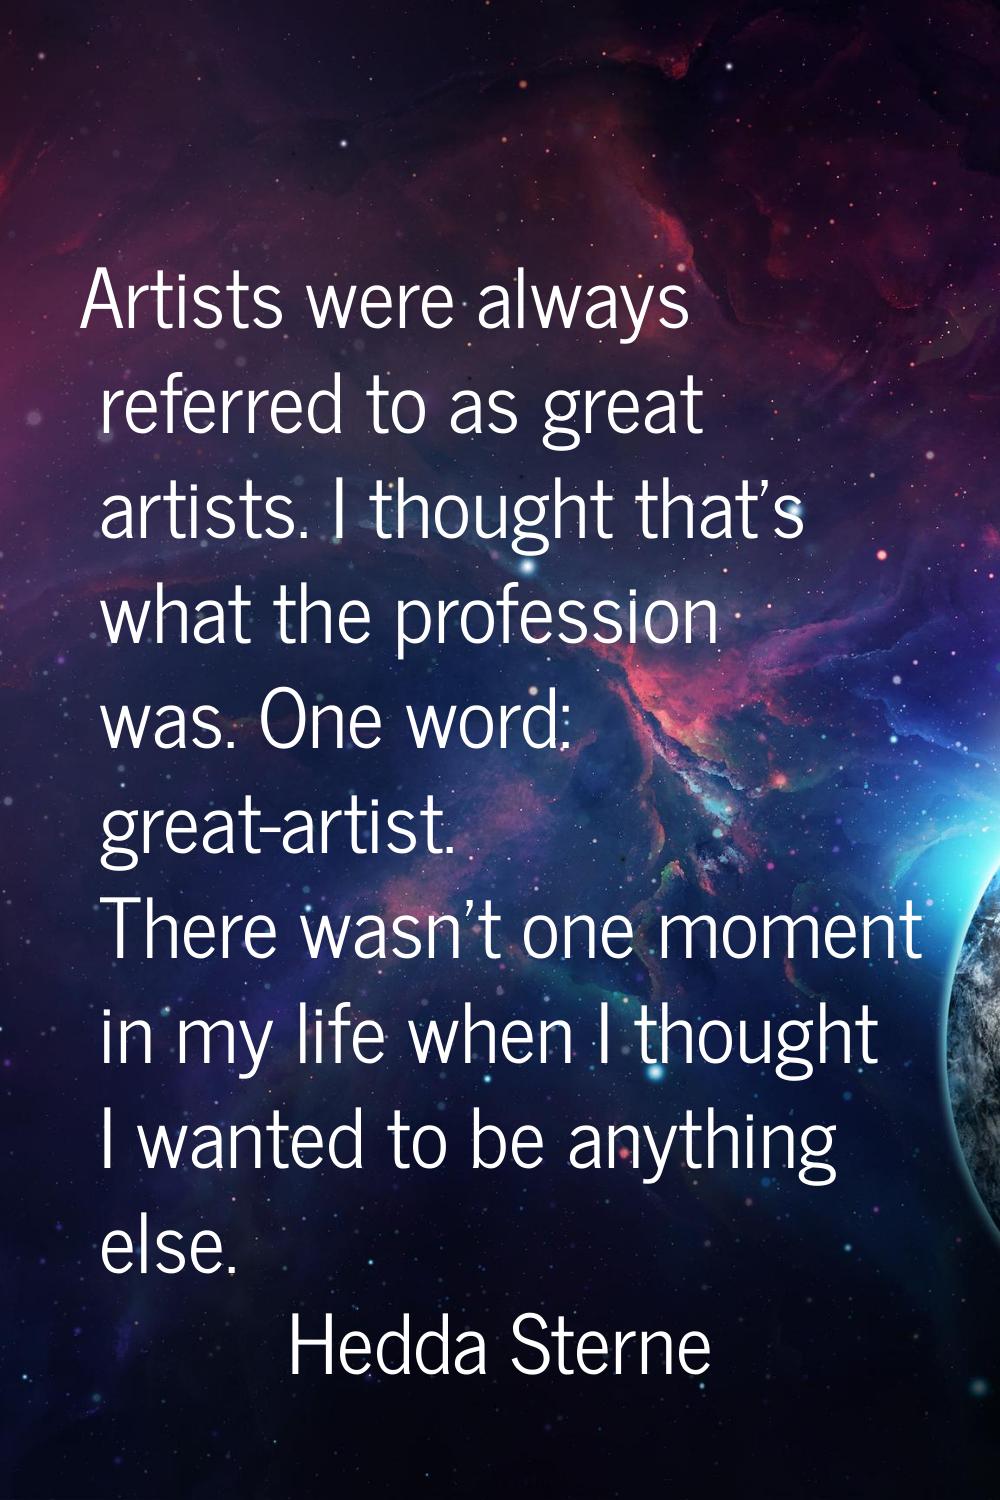 Artists were always referred to as great artists. I thought that's what the profession was. One wor